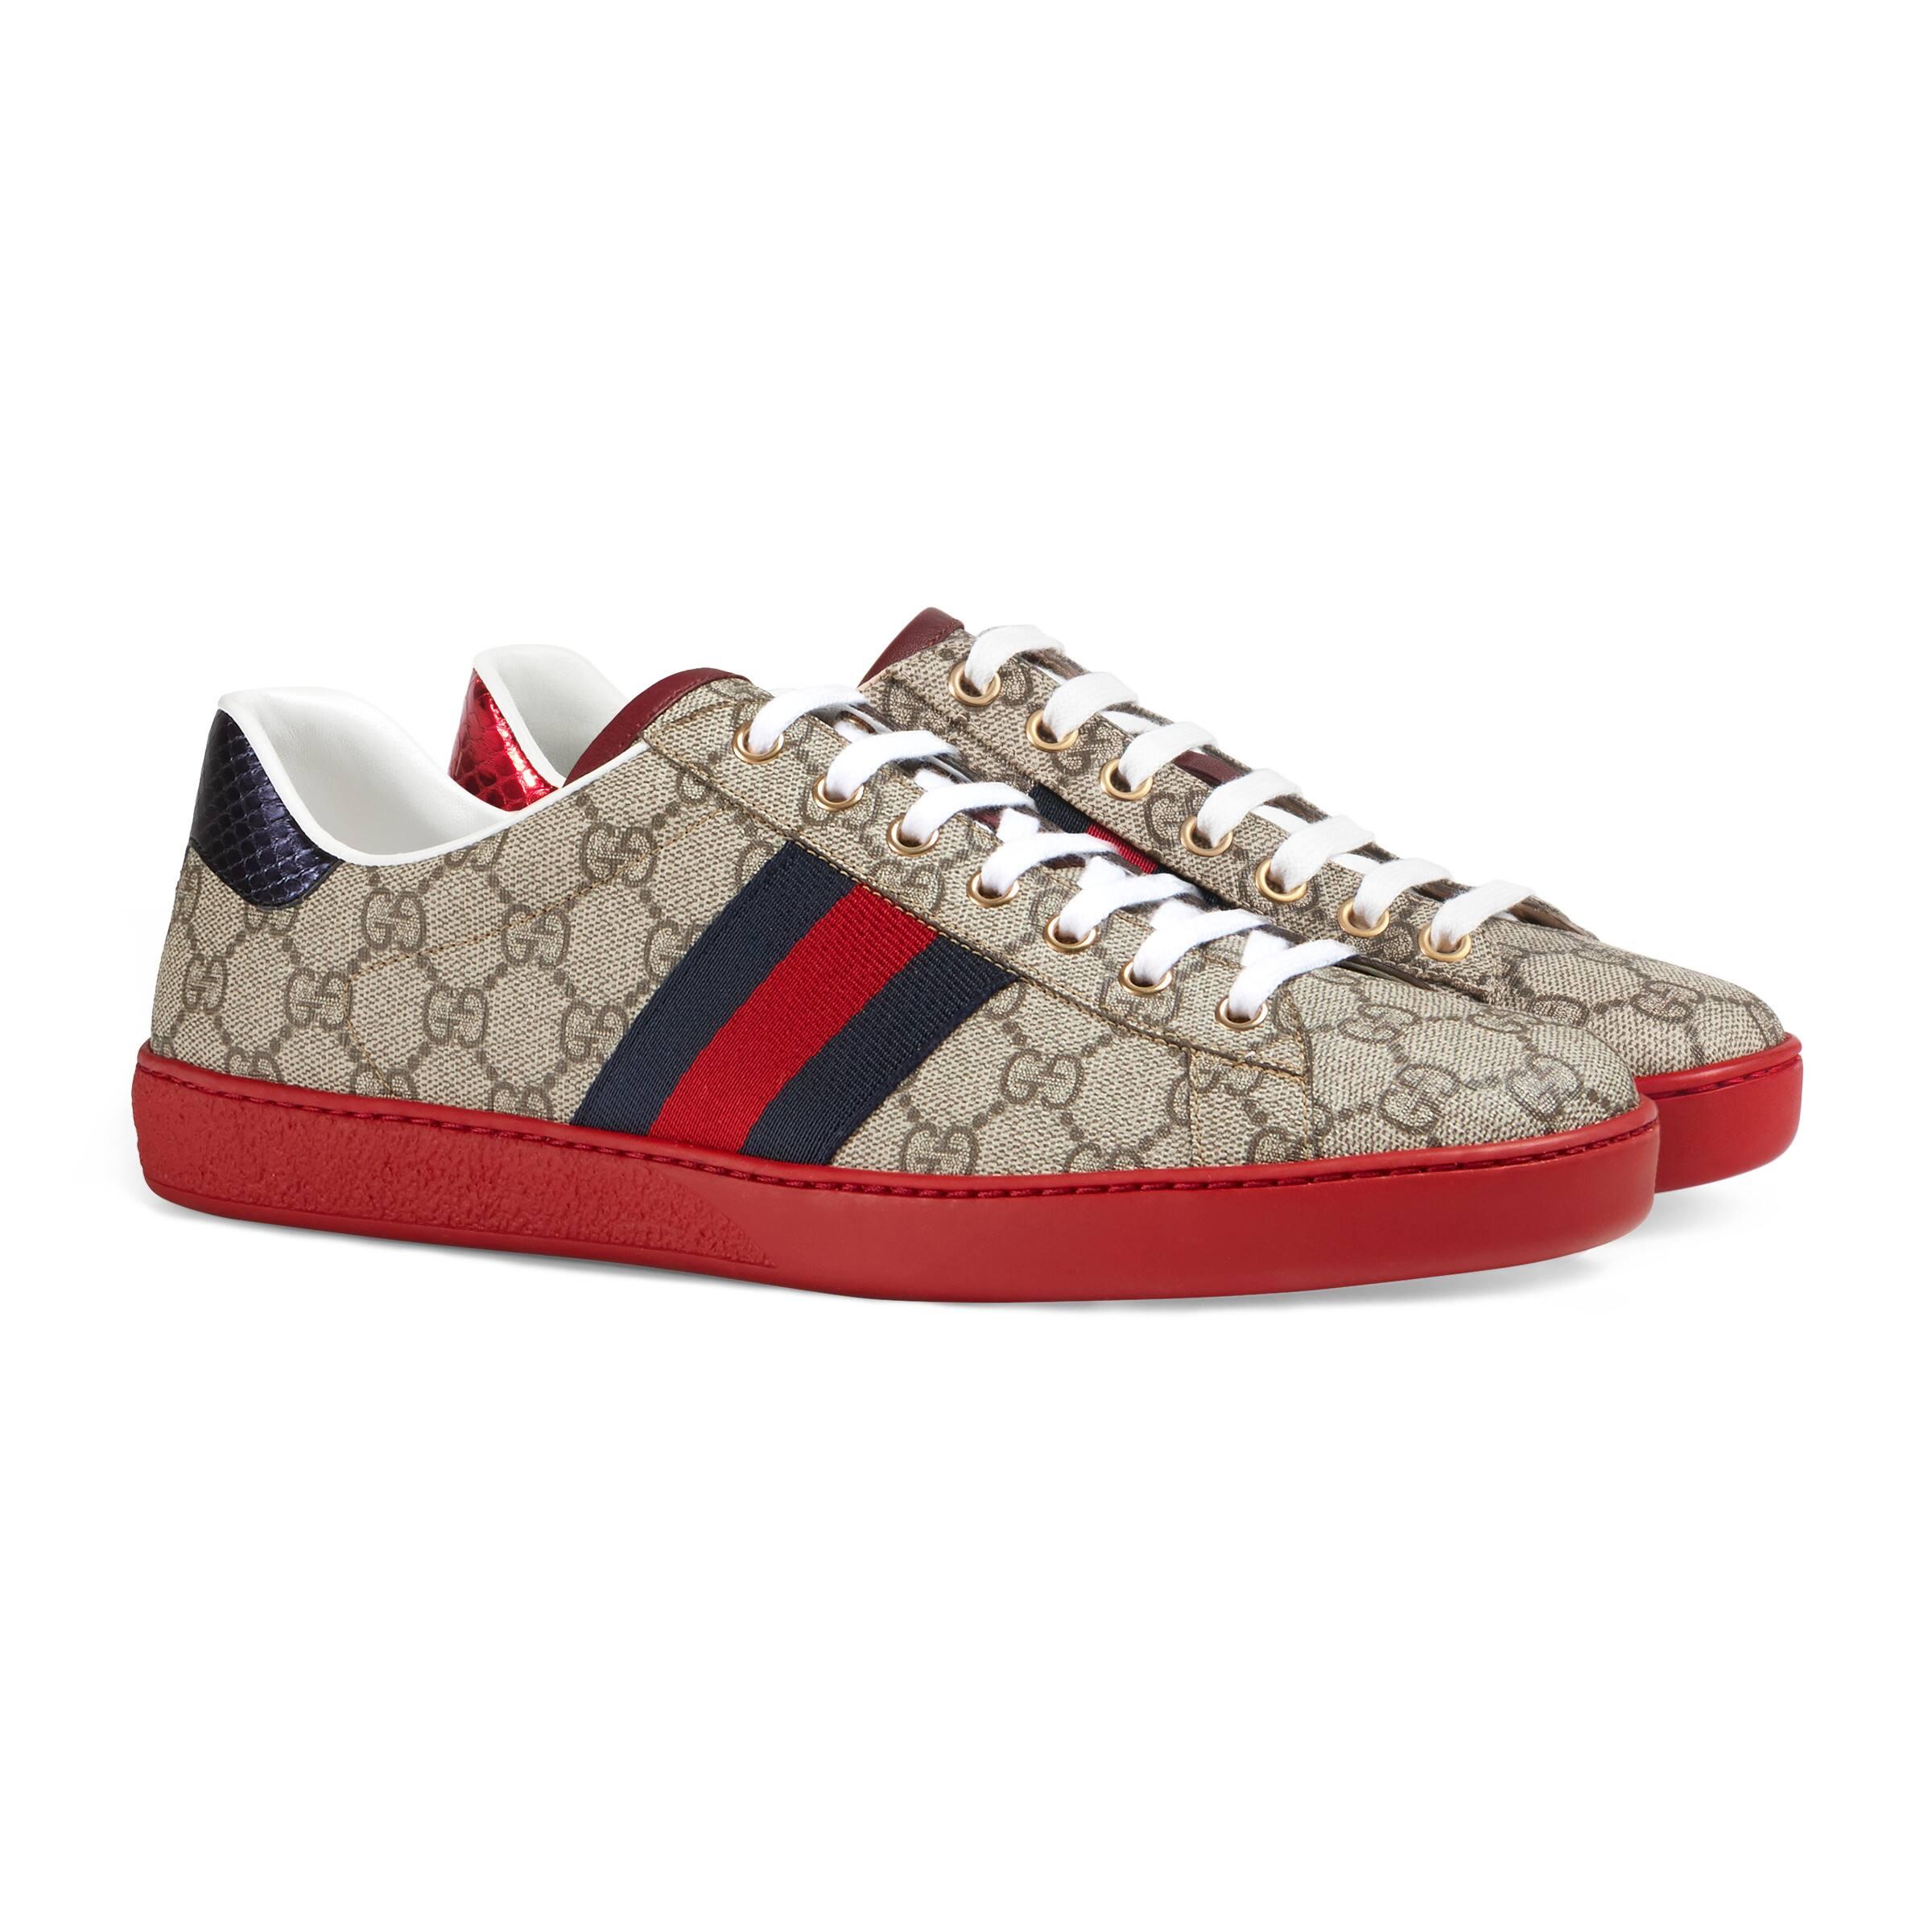 Gucci Canvas GG Supreme Low-top Sneaker in Beige (Natural) for Men - Save - Lyst